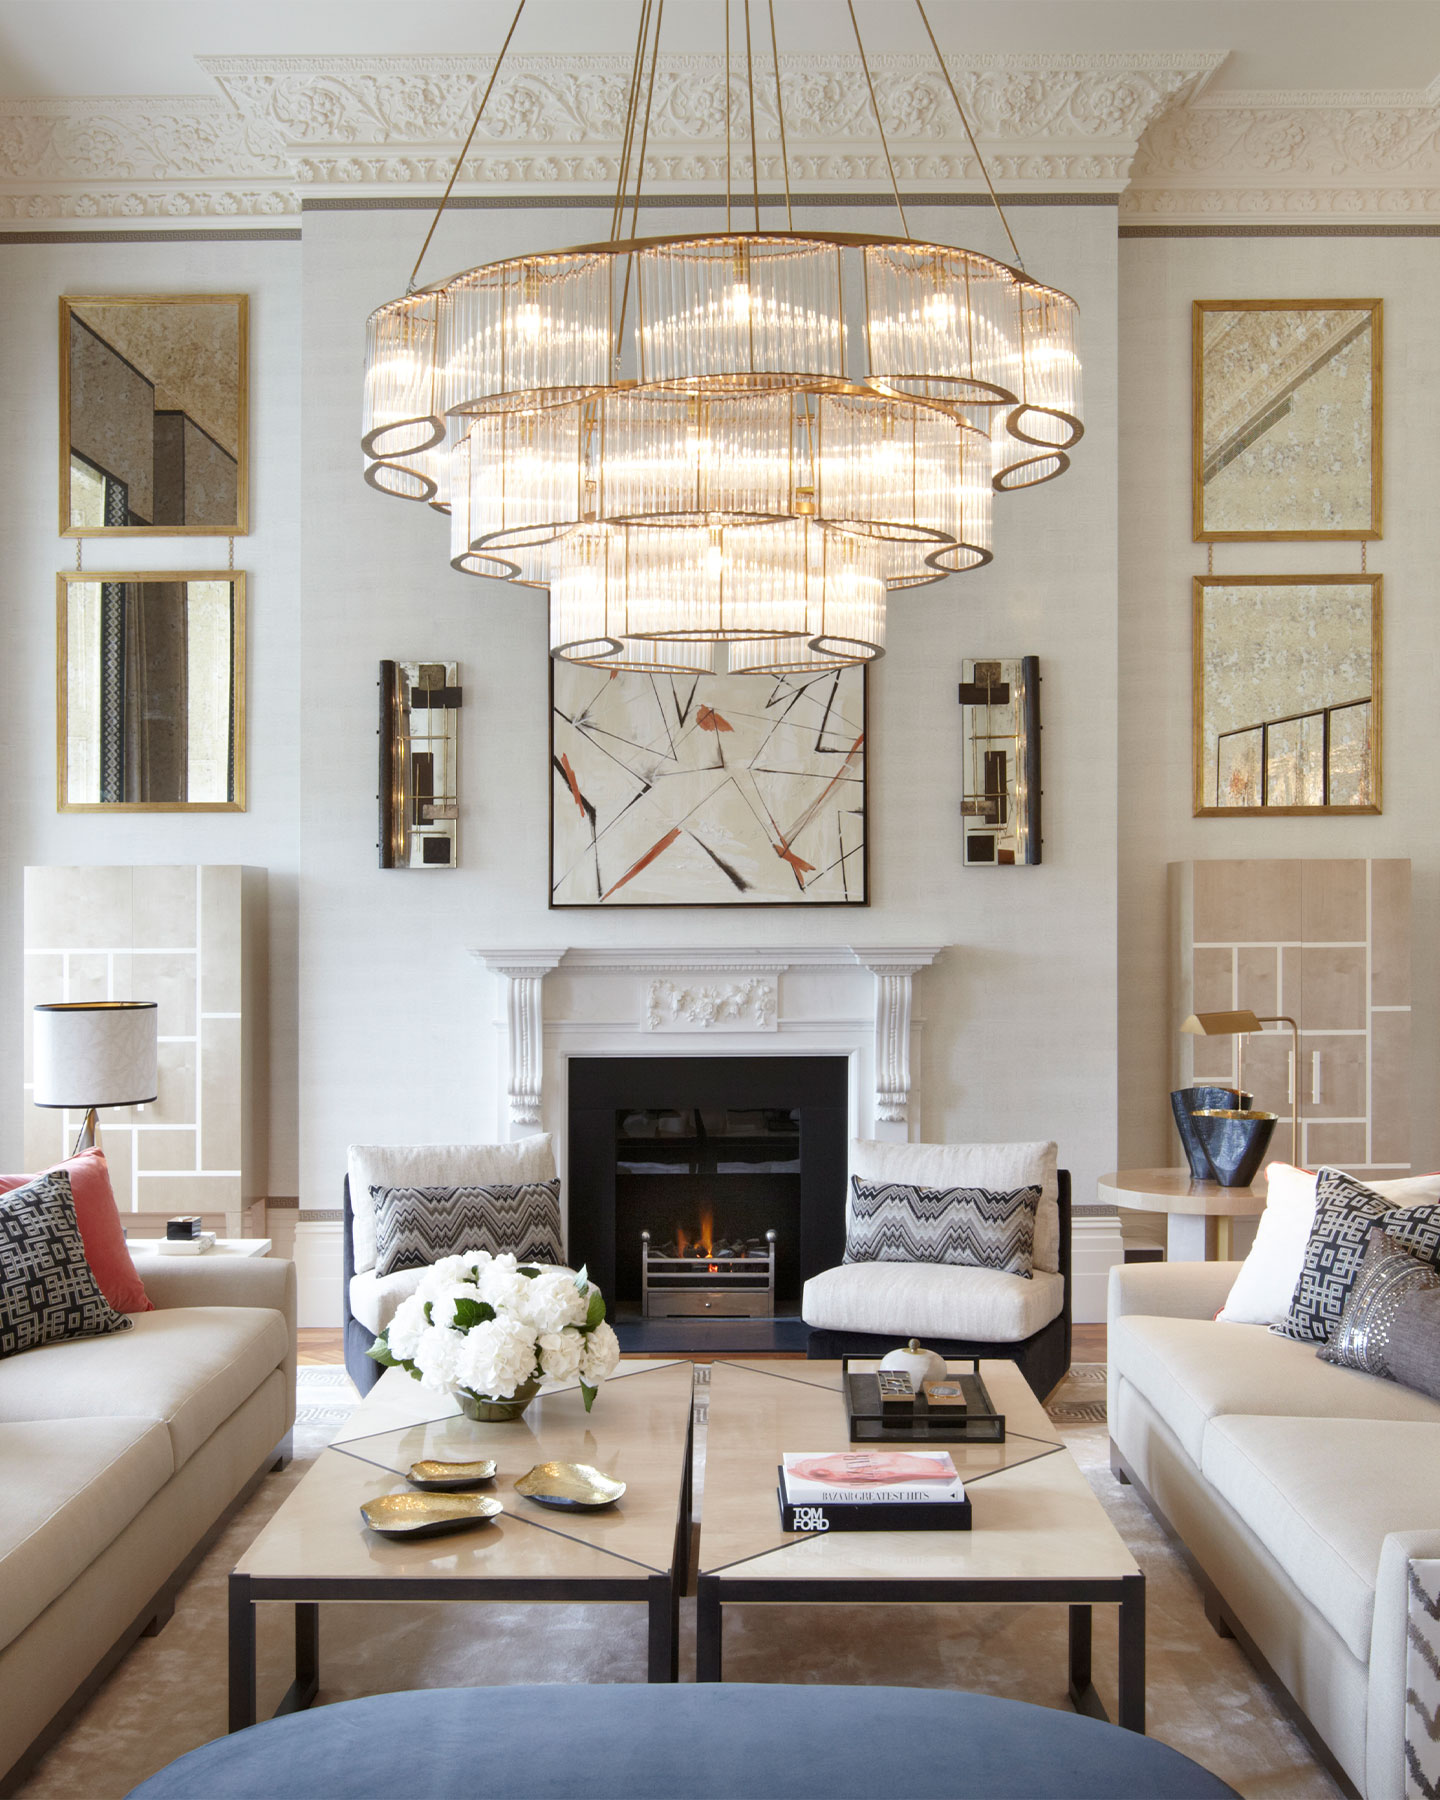 Formal living room with bespoke glass and brass chandelier